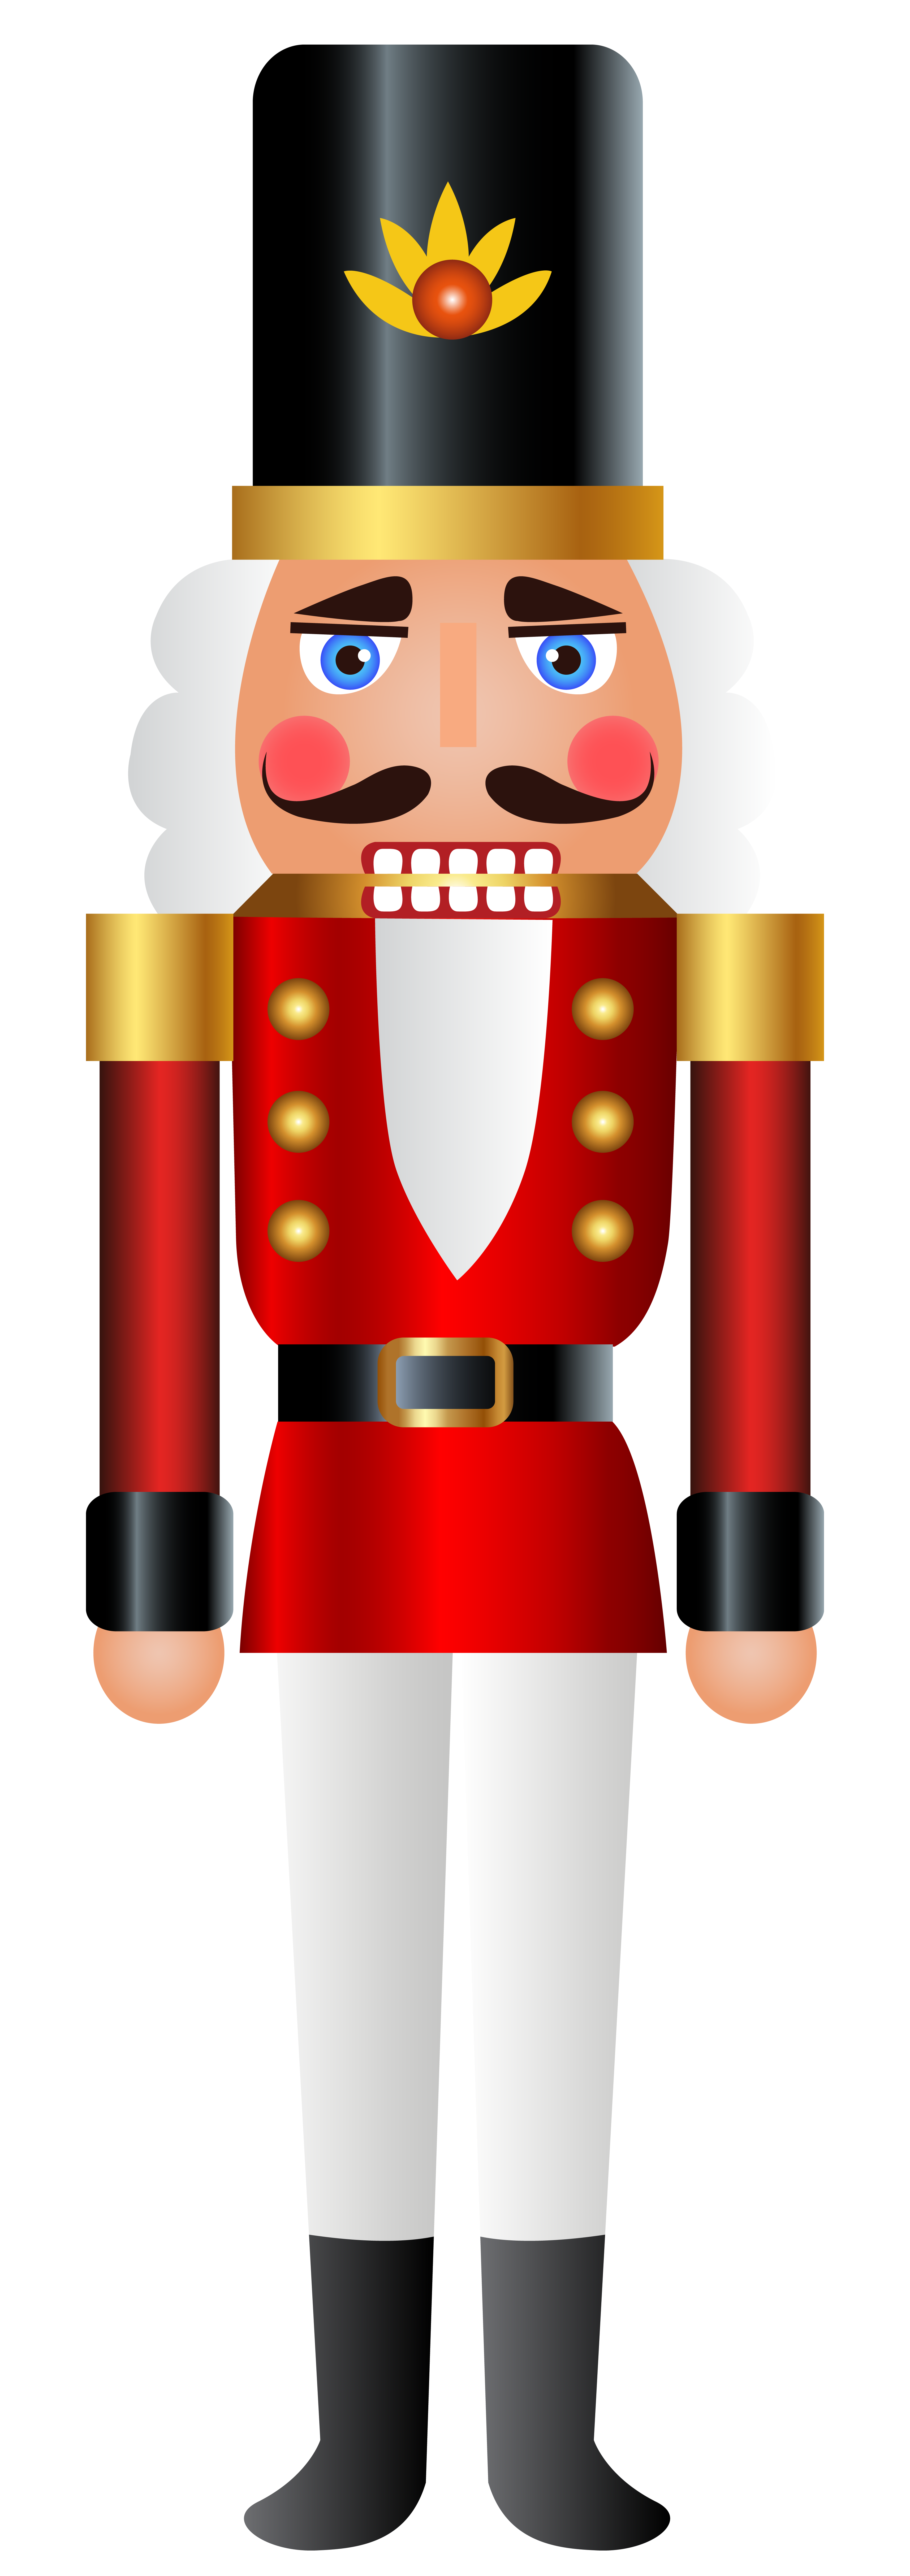 Movies clipart tool. Free nutcracker cliparts download